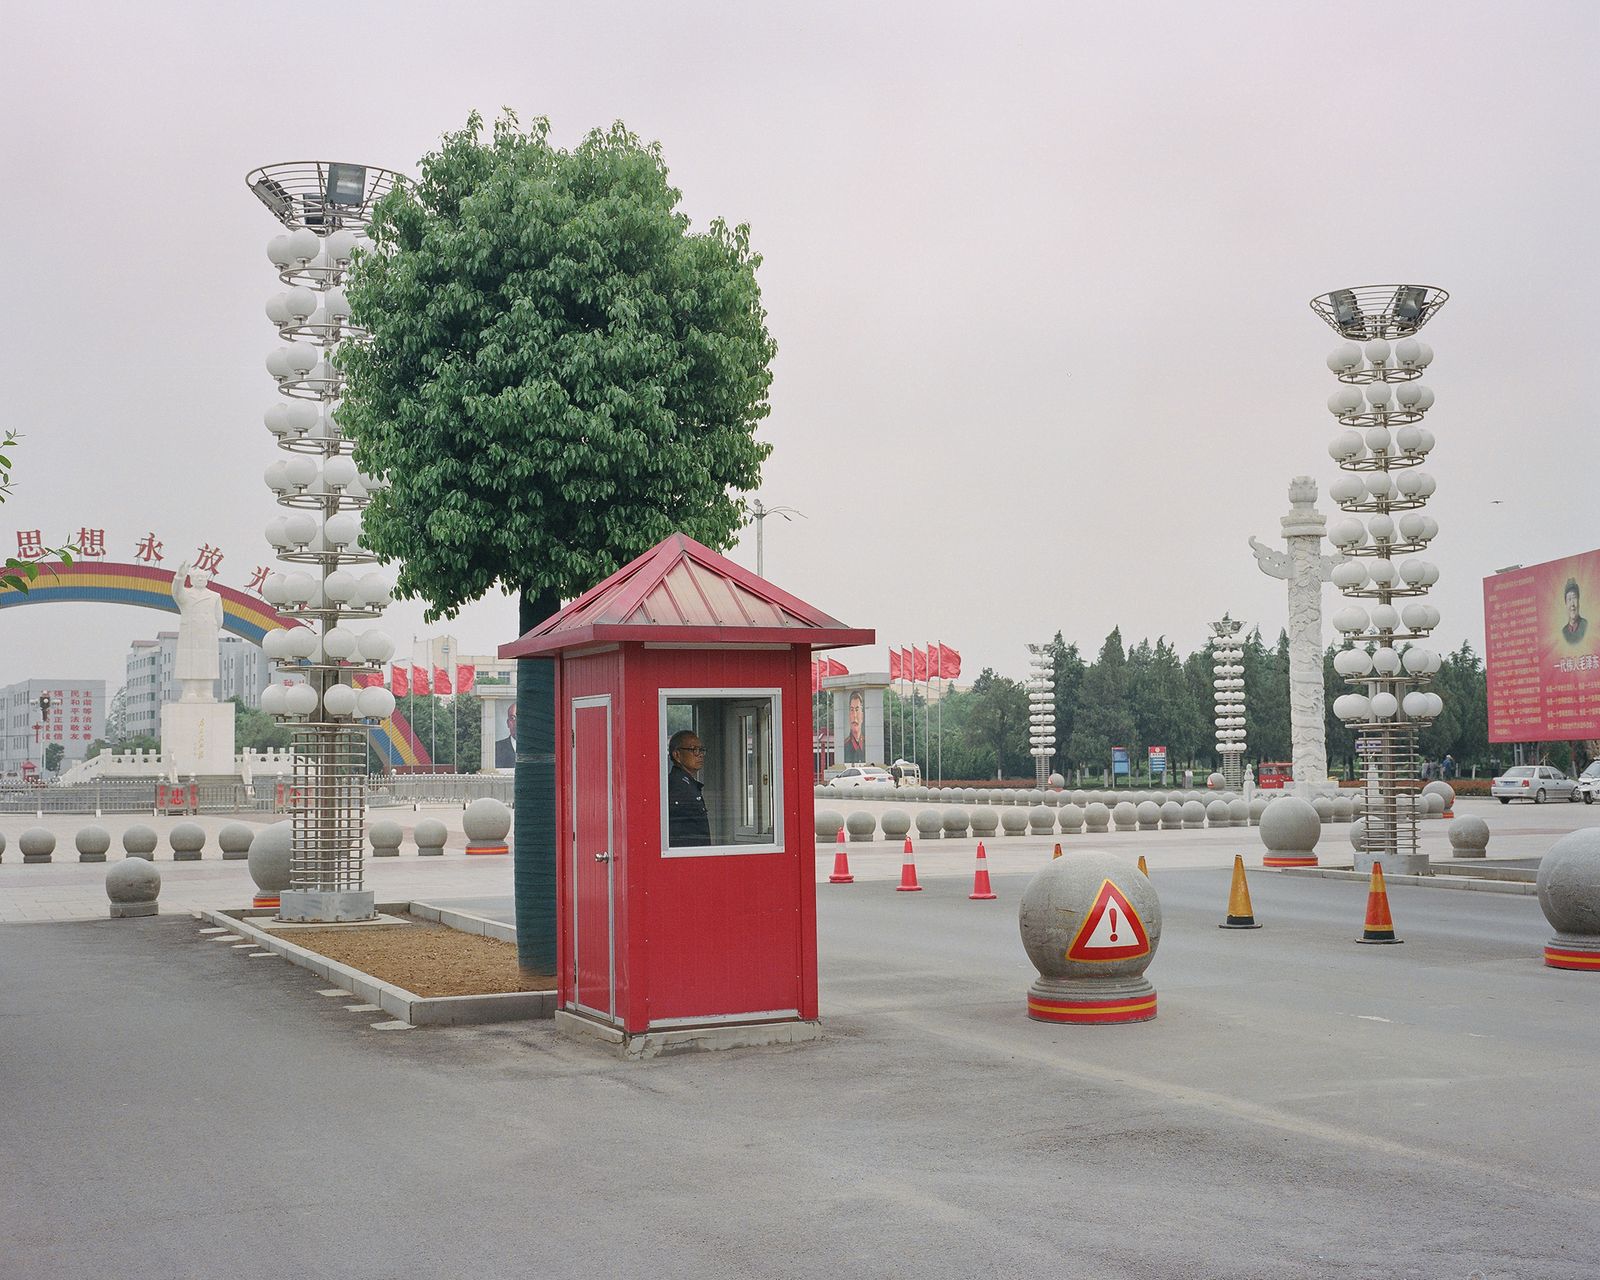 © Yangkun Shi - Image from the Retrotopia photography project